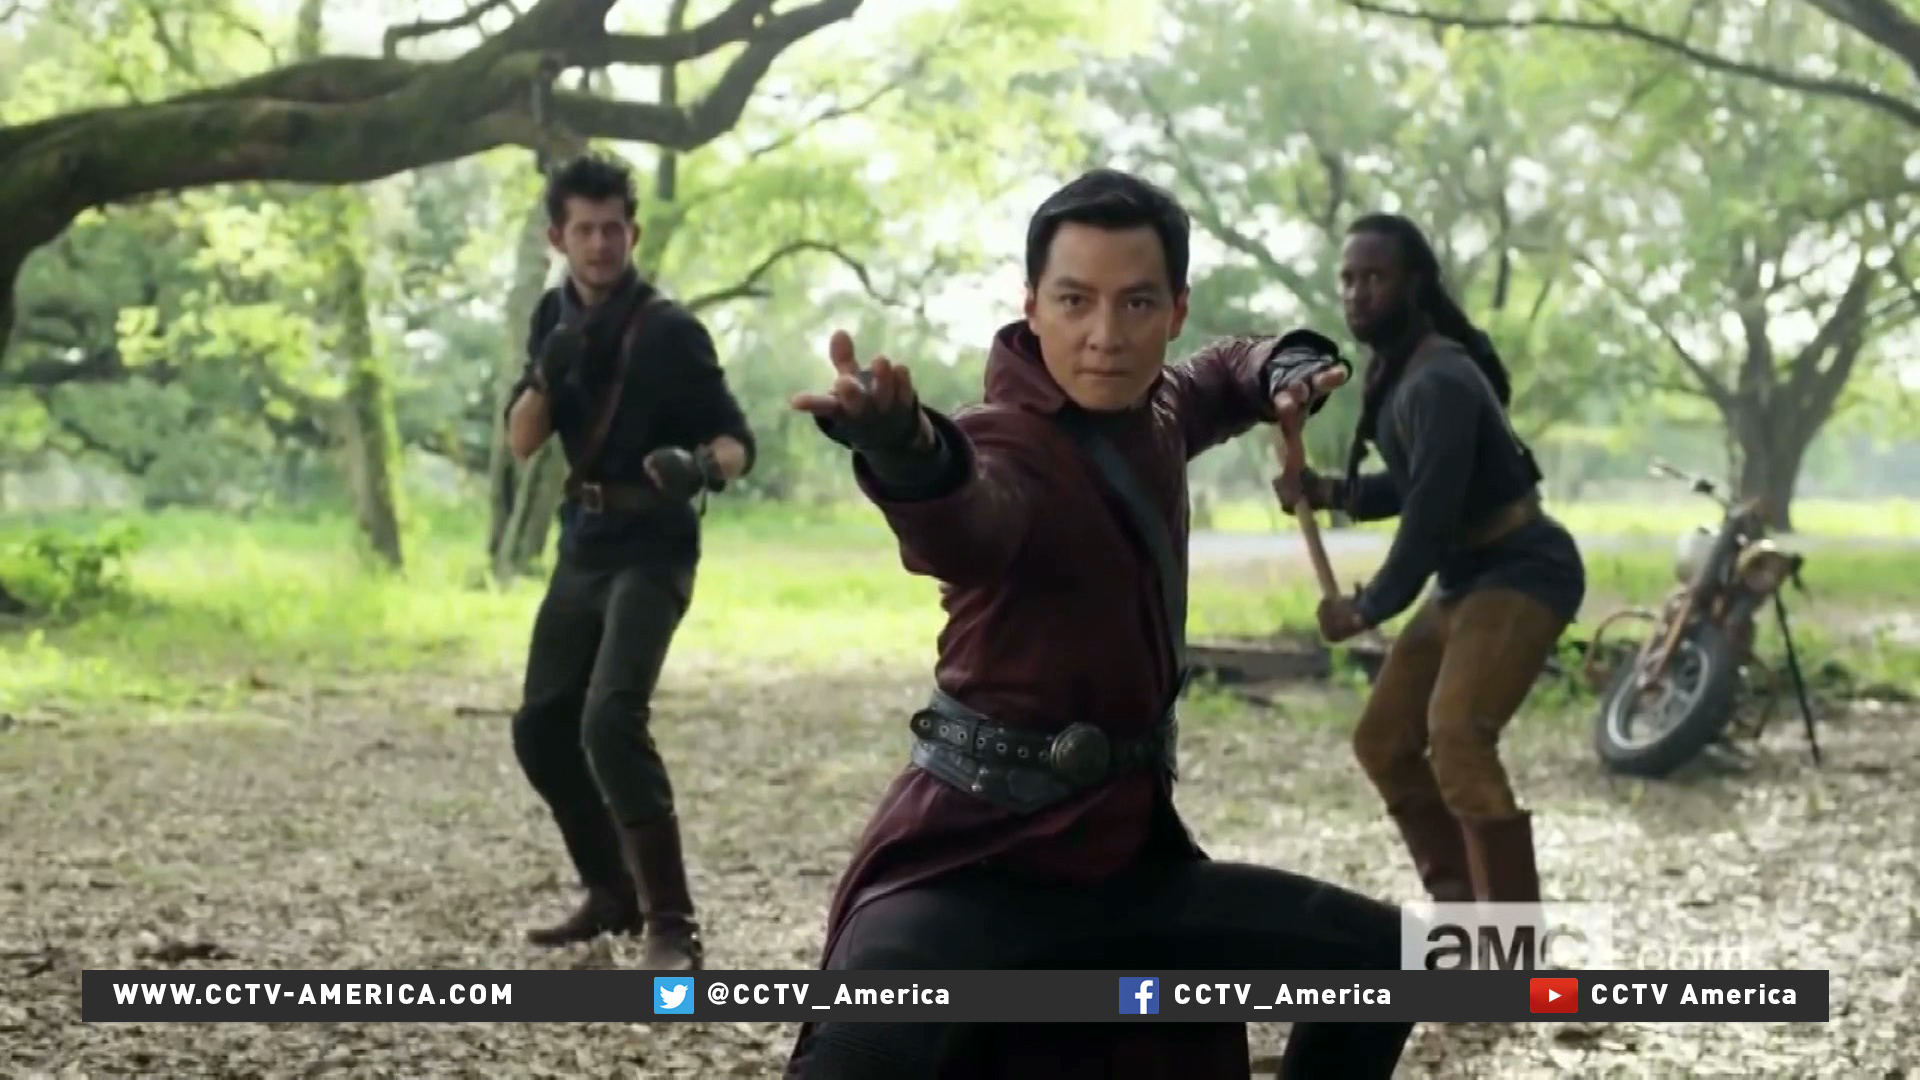 Into the Badlands producer, star Daniel Wu breaks barriers for Asian actors